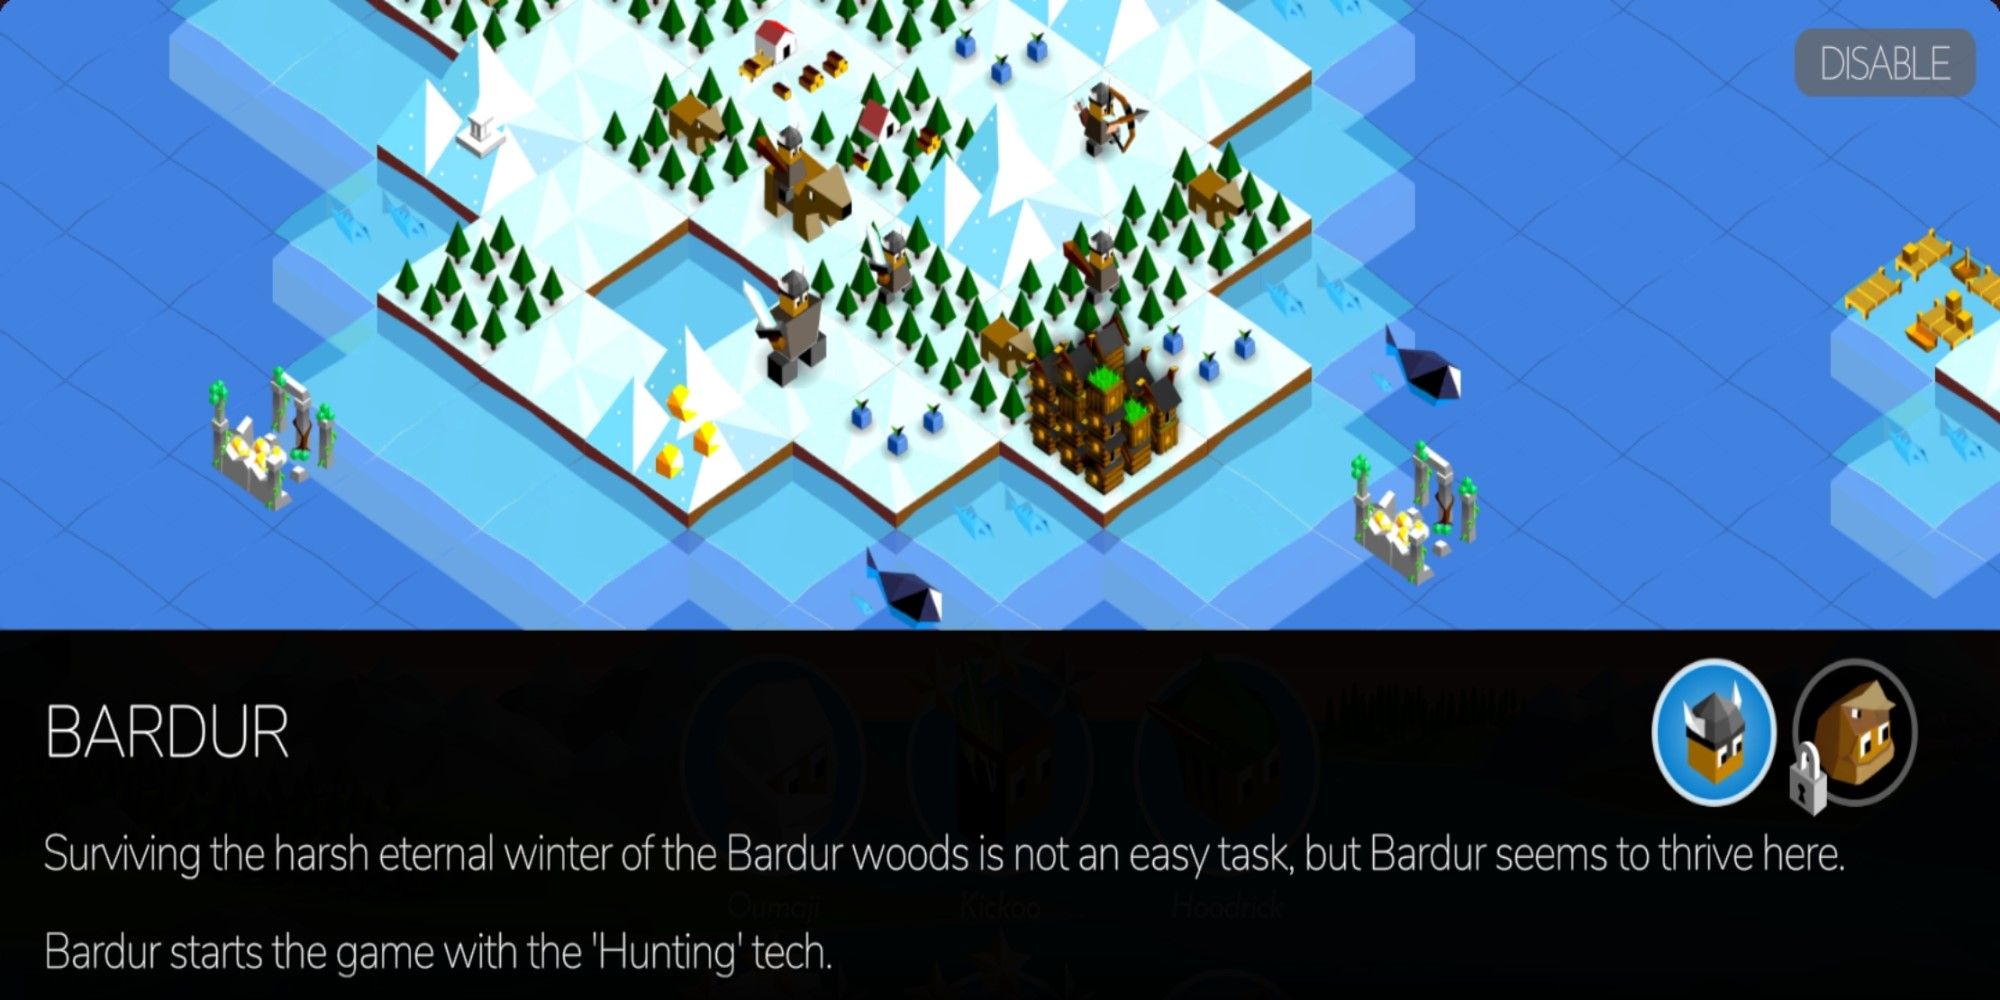 Information on the Bardur Tribe from Battle of Polytopia.